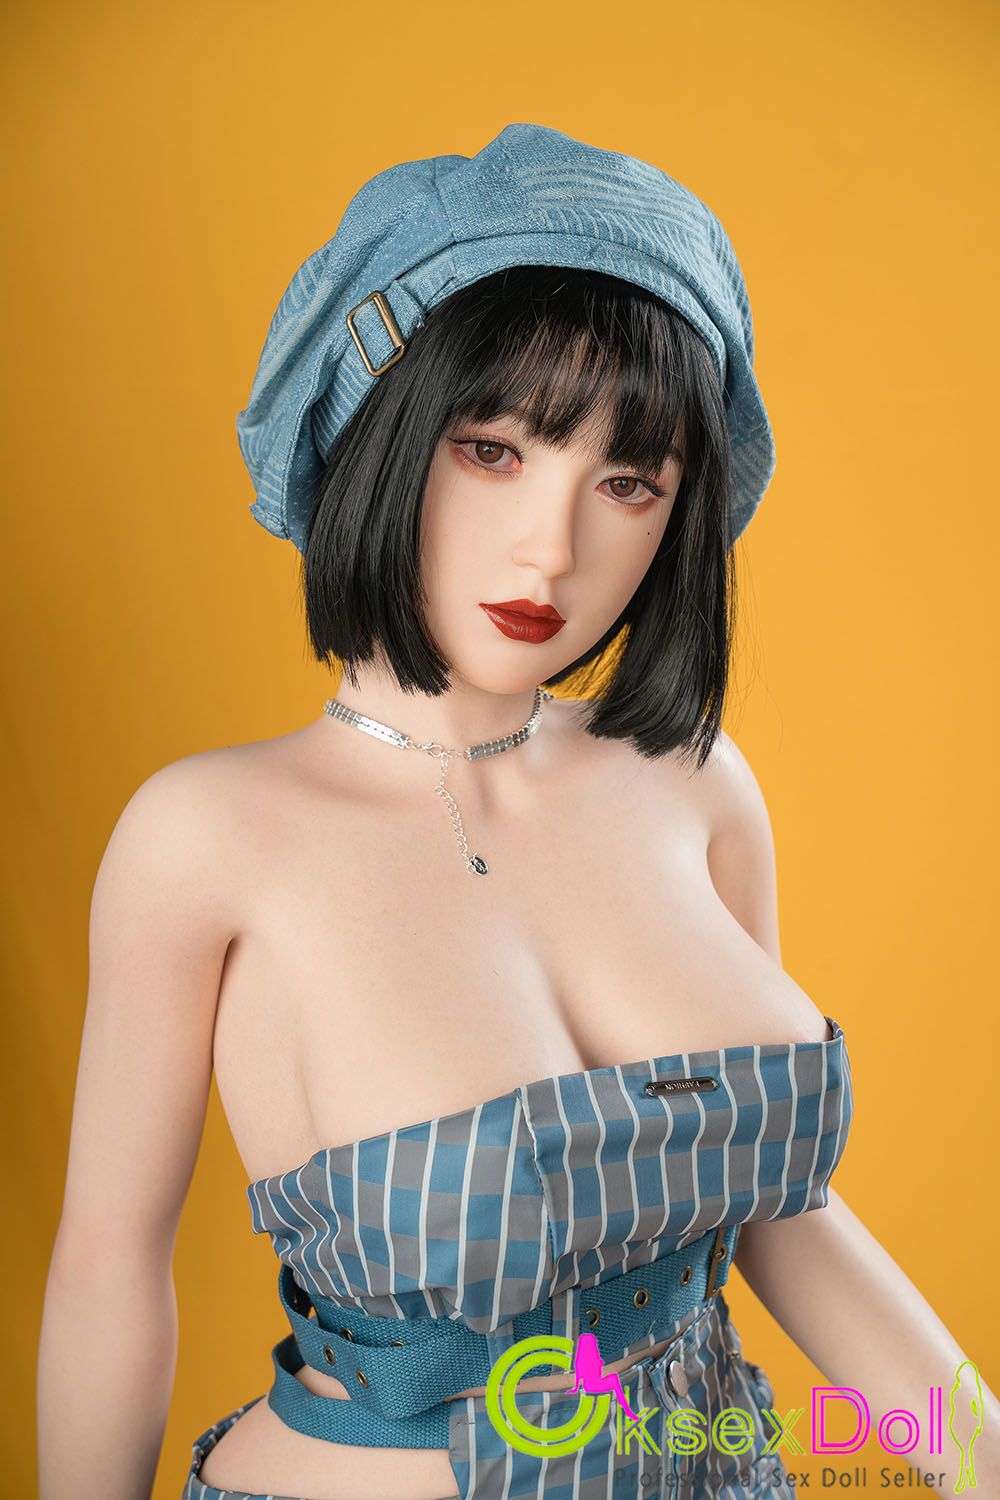 Asian Young sex doll Pic